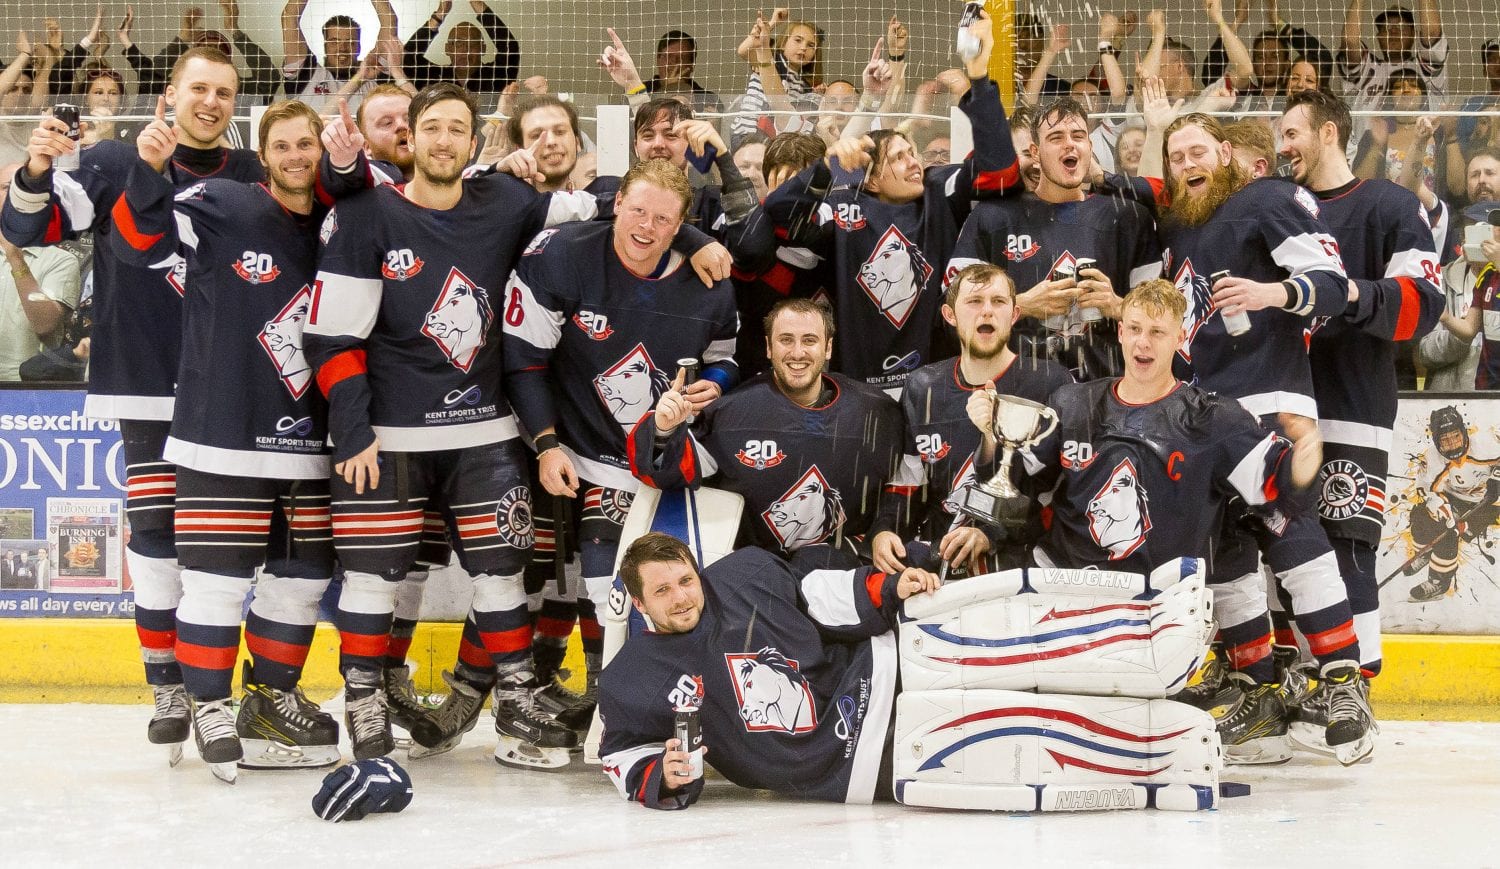 10 Years with the Chelmsford Chieftains